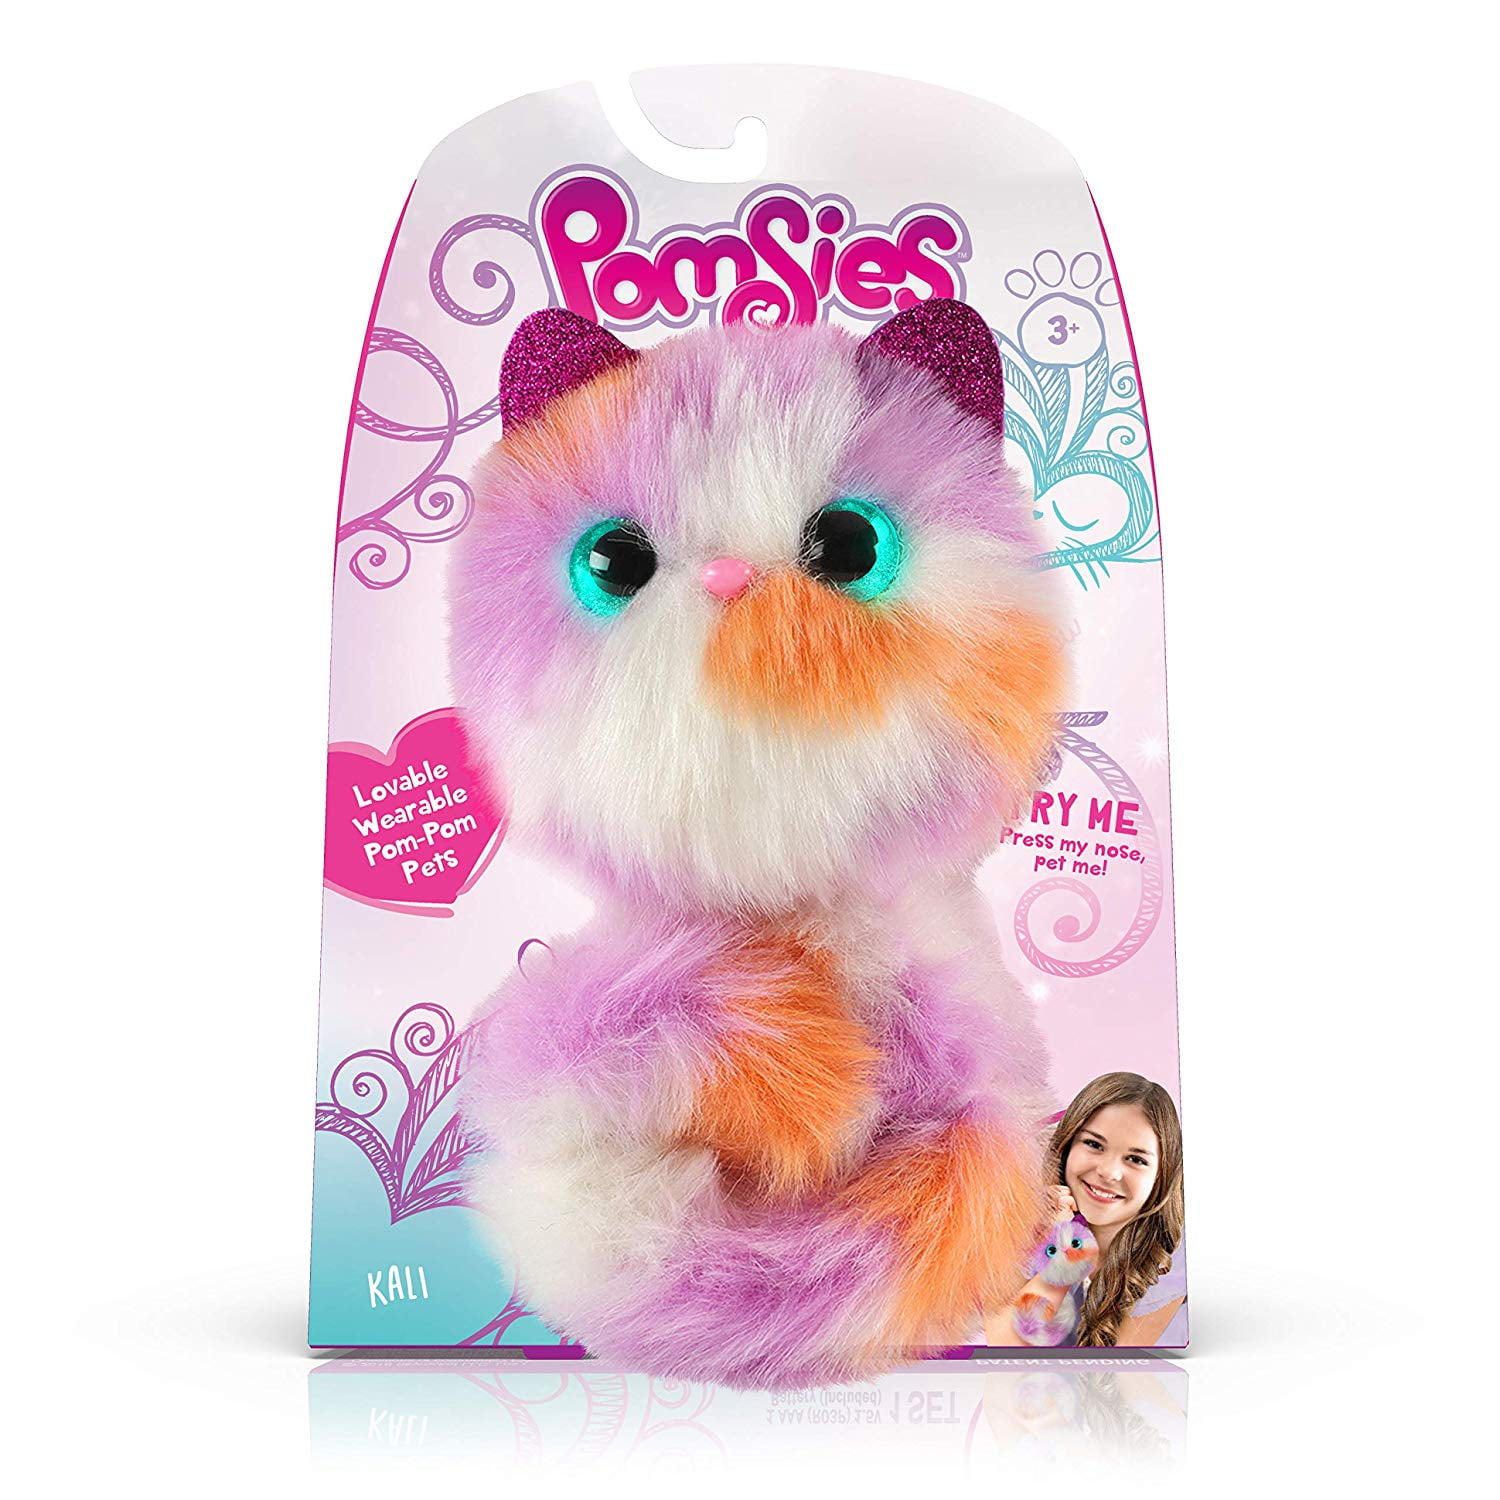 Pomsies SHERBERT *Walmart Exclusive*  50 Sounds/Reactions New Toy For 2018 